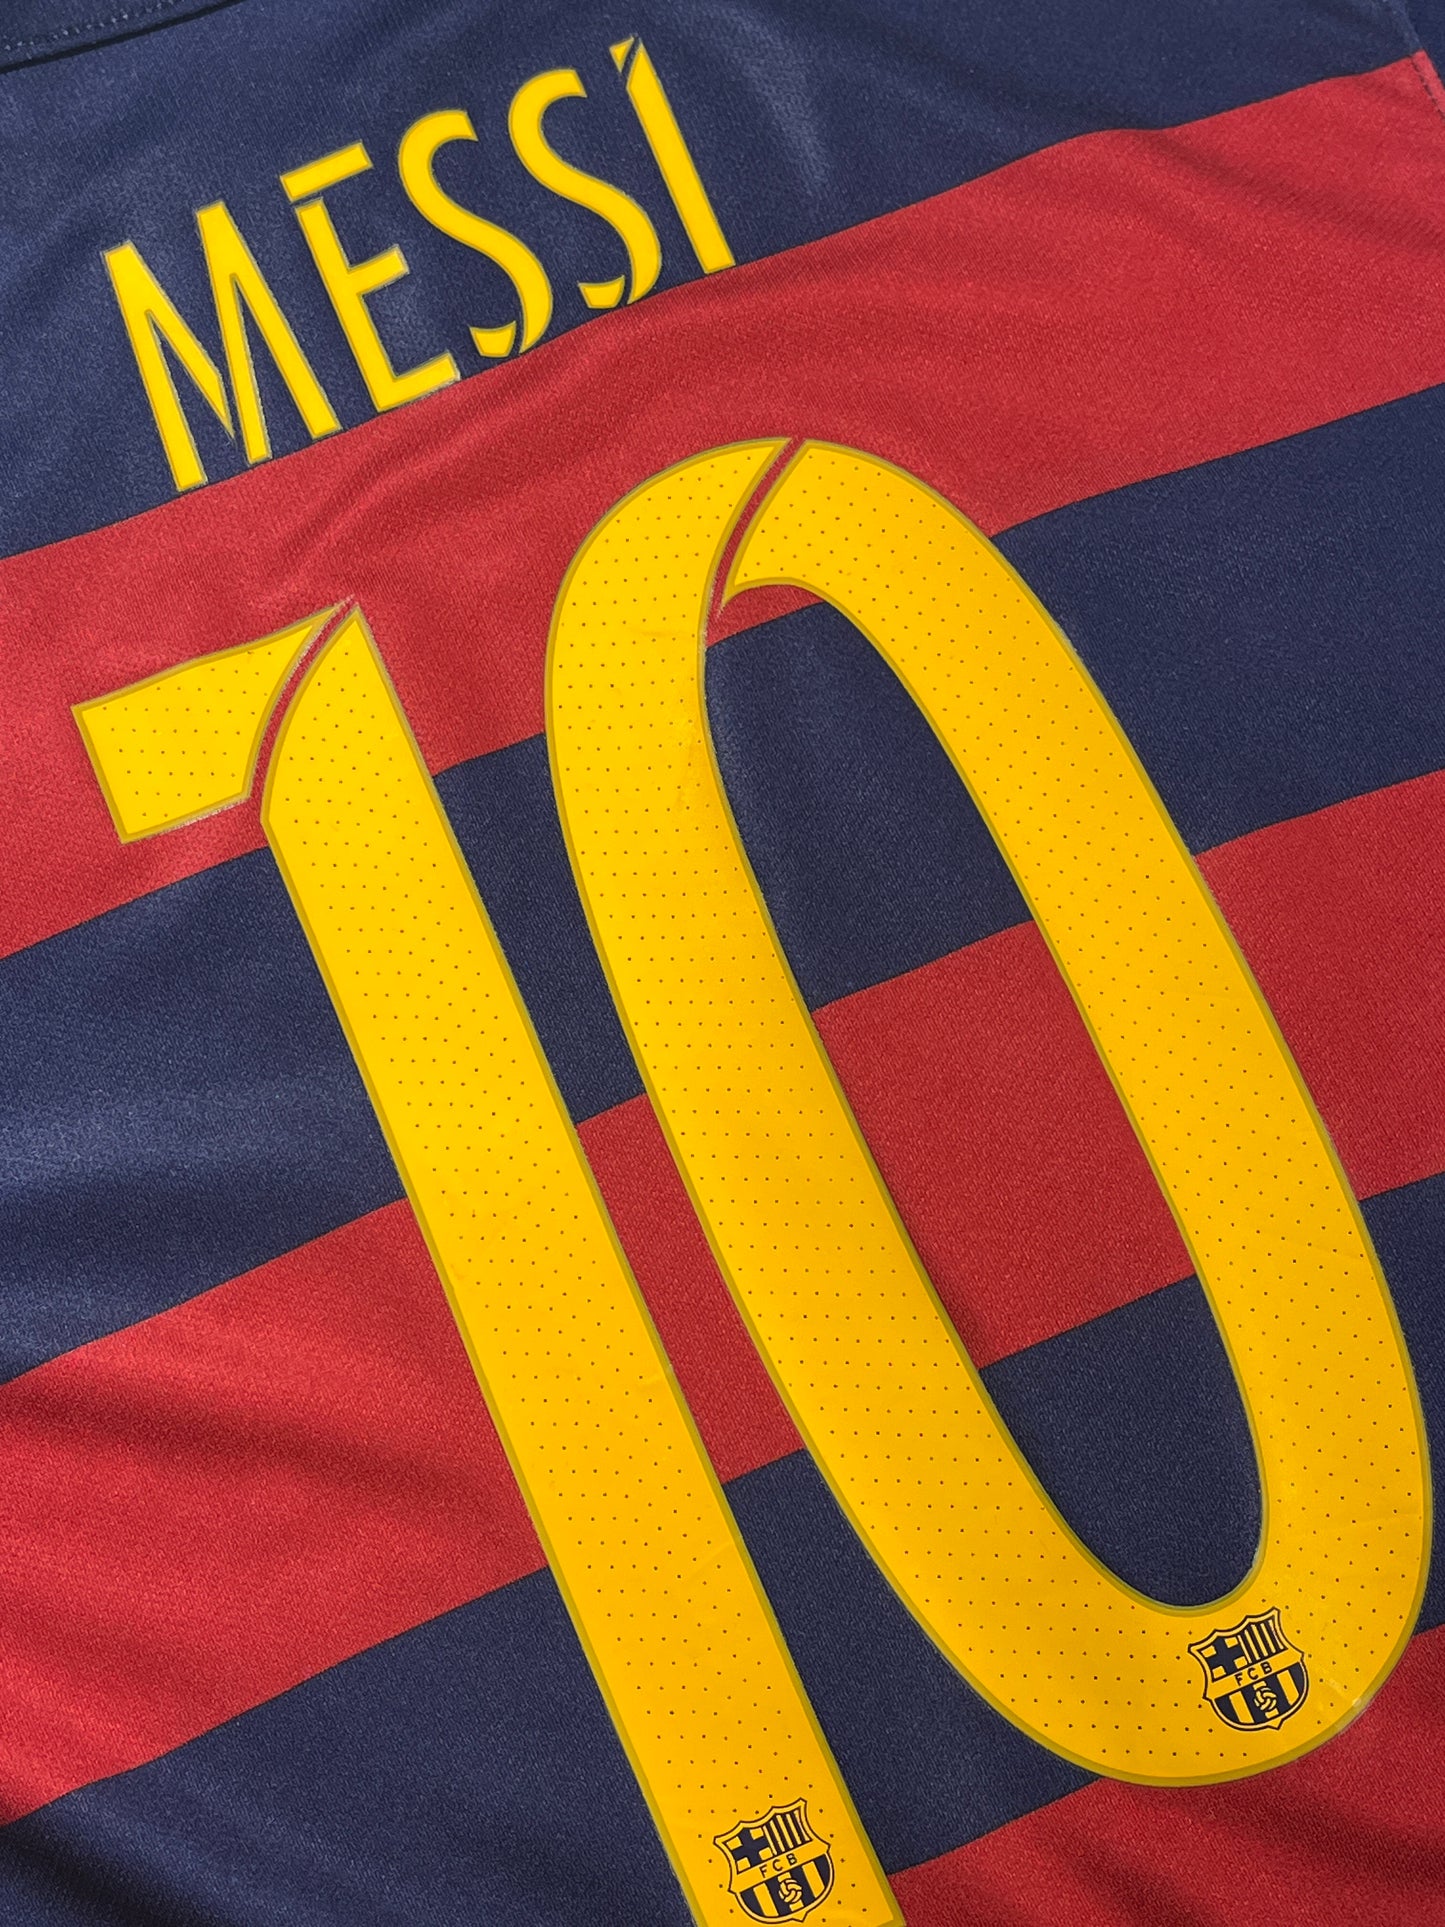 Vintage Barcelona Soccer Jersey Messi 10 Classic Football Jersey Nike